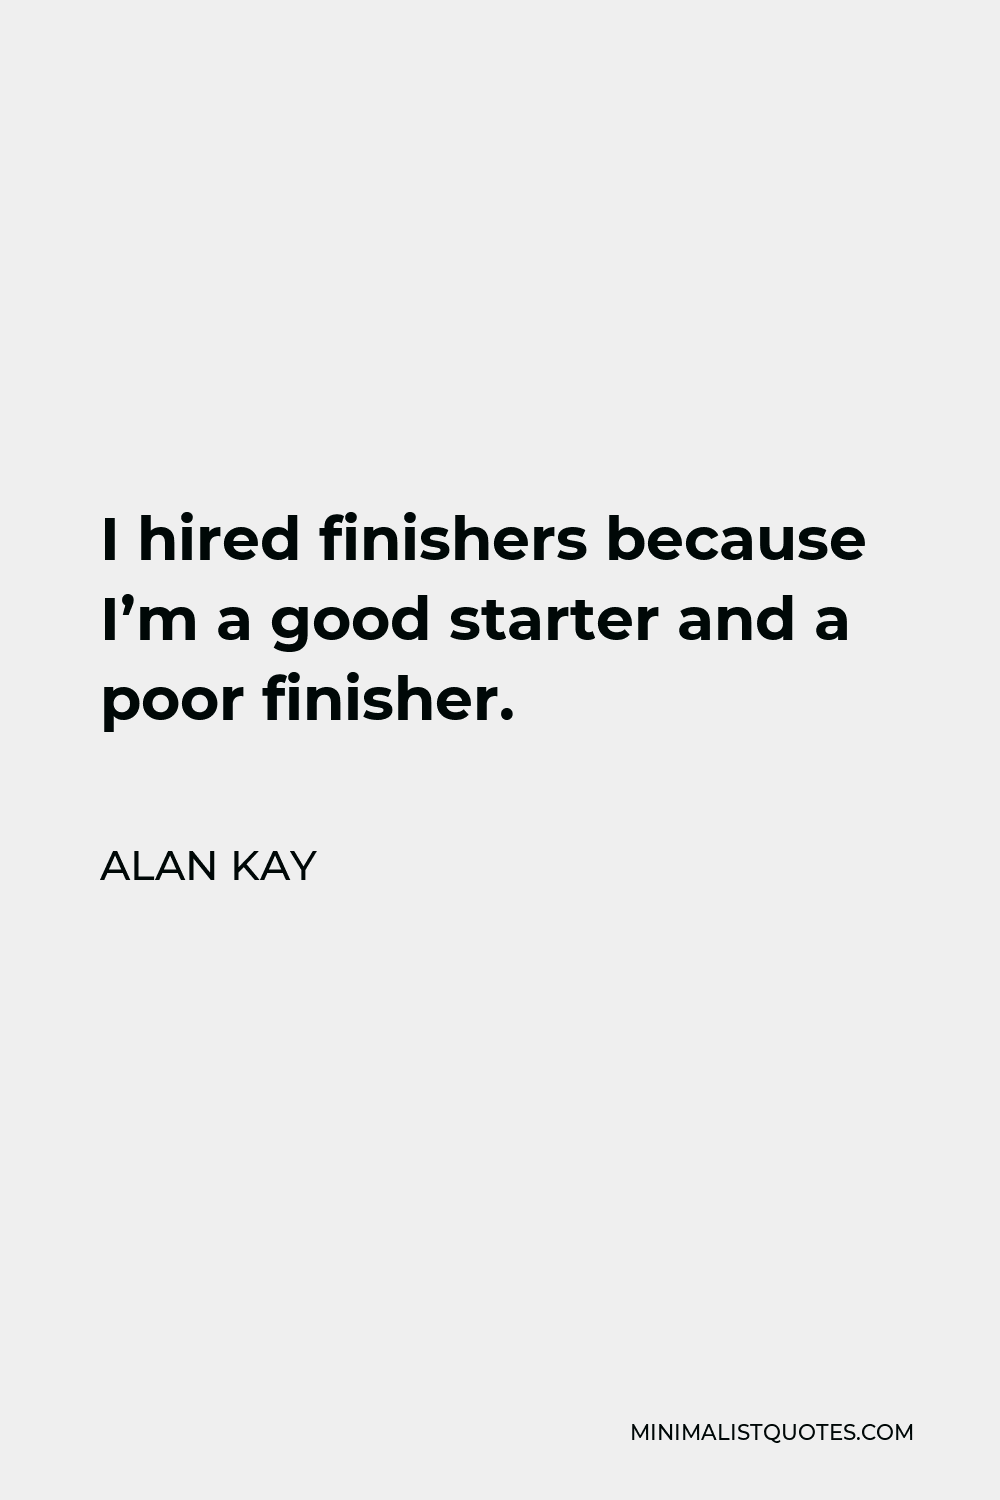 Alan Kay Quote - I hired finishers because I’m a good starter and a poor finisher.